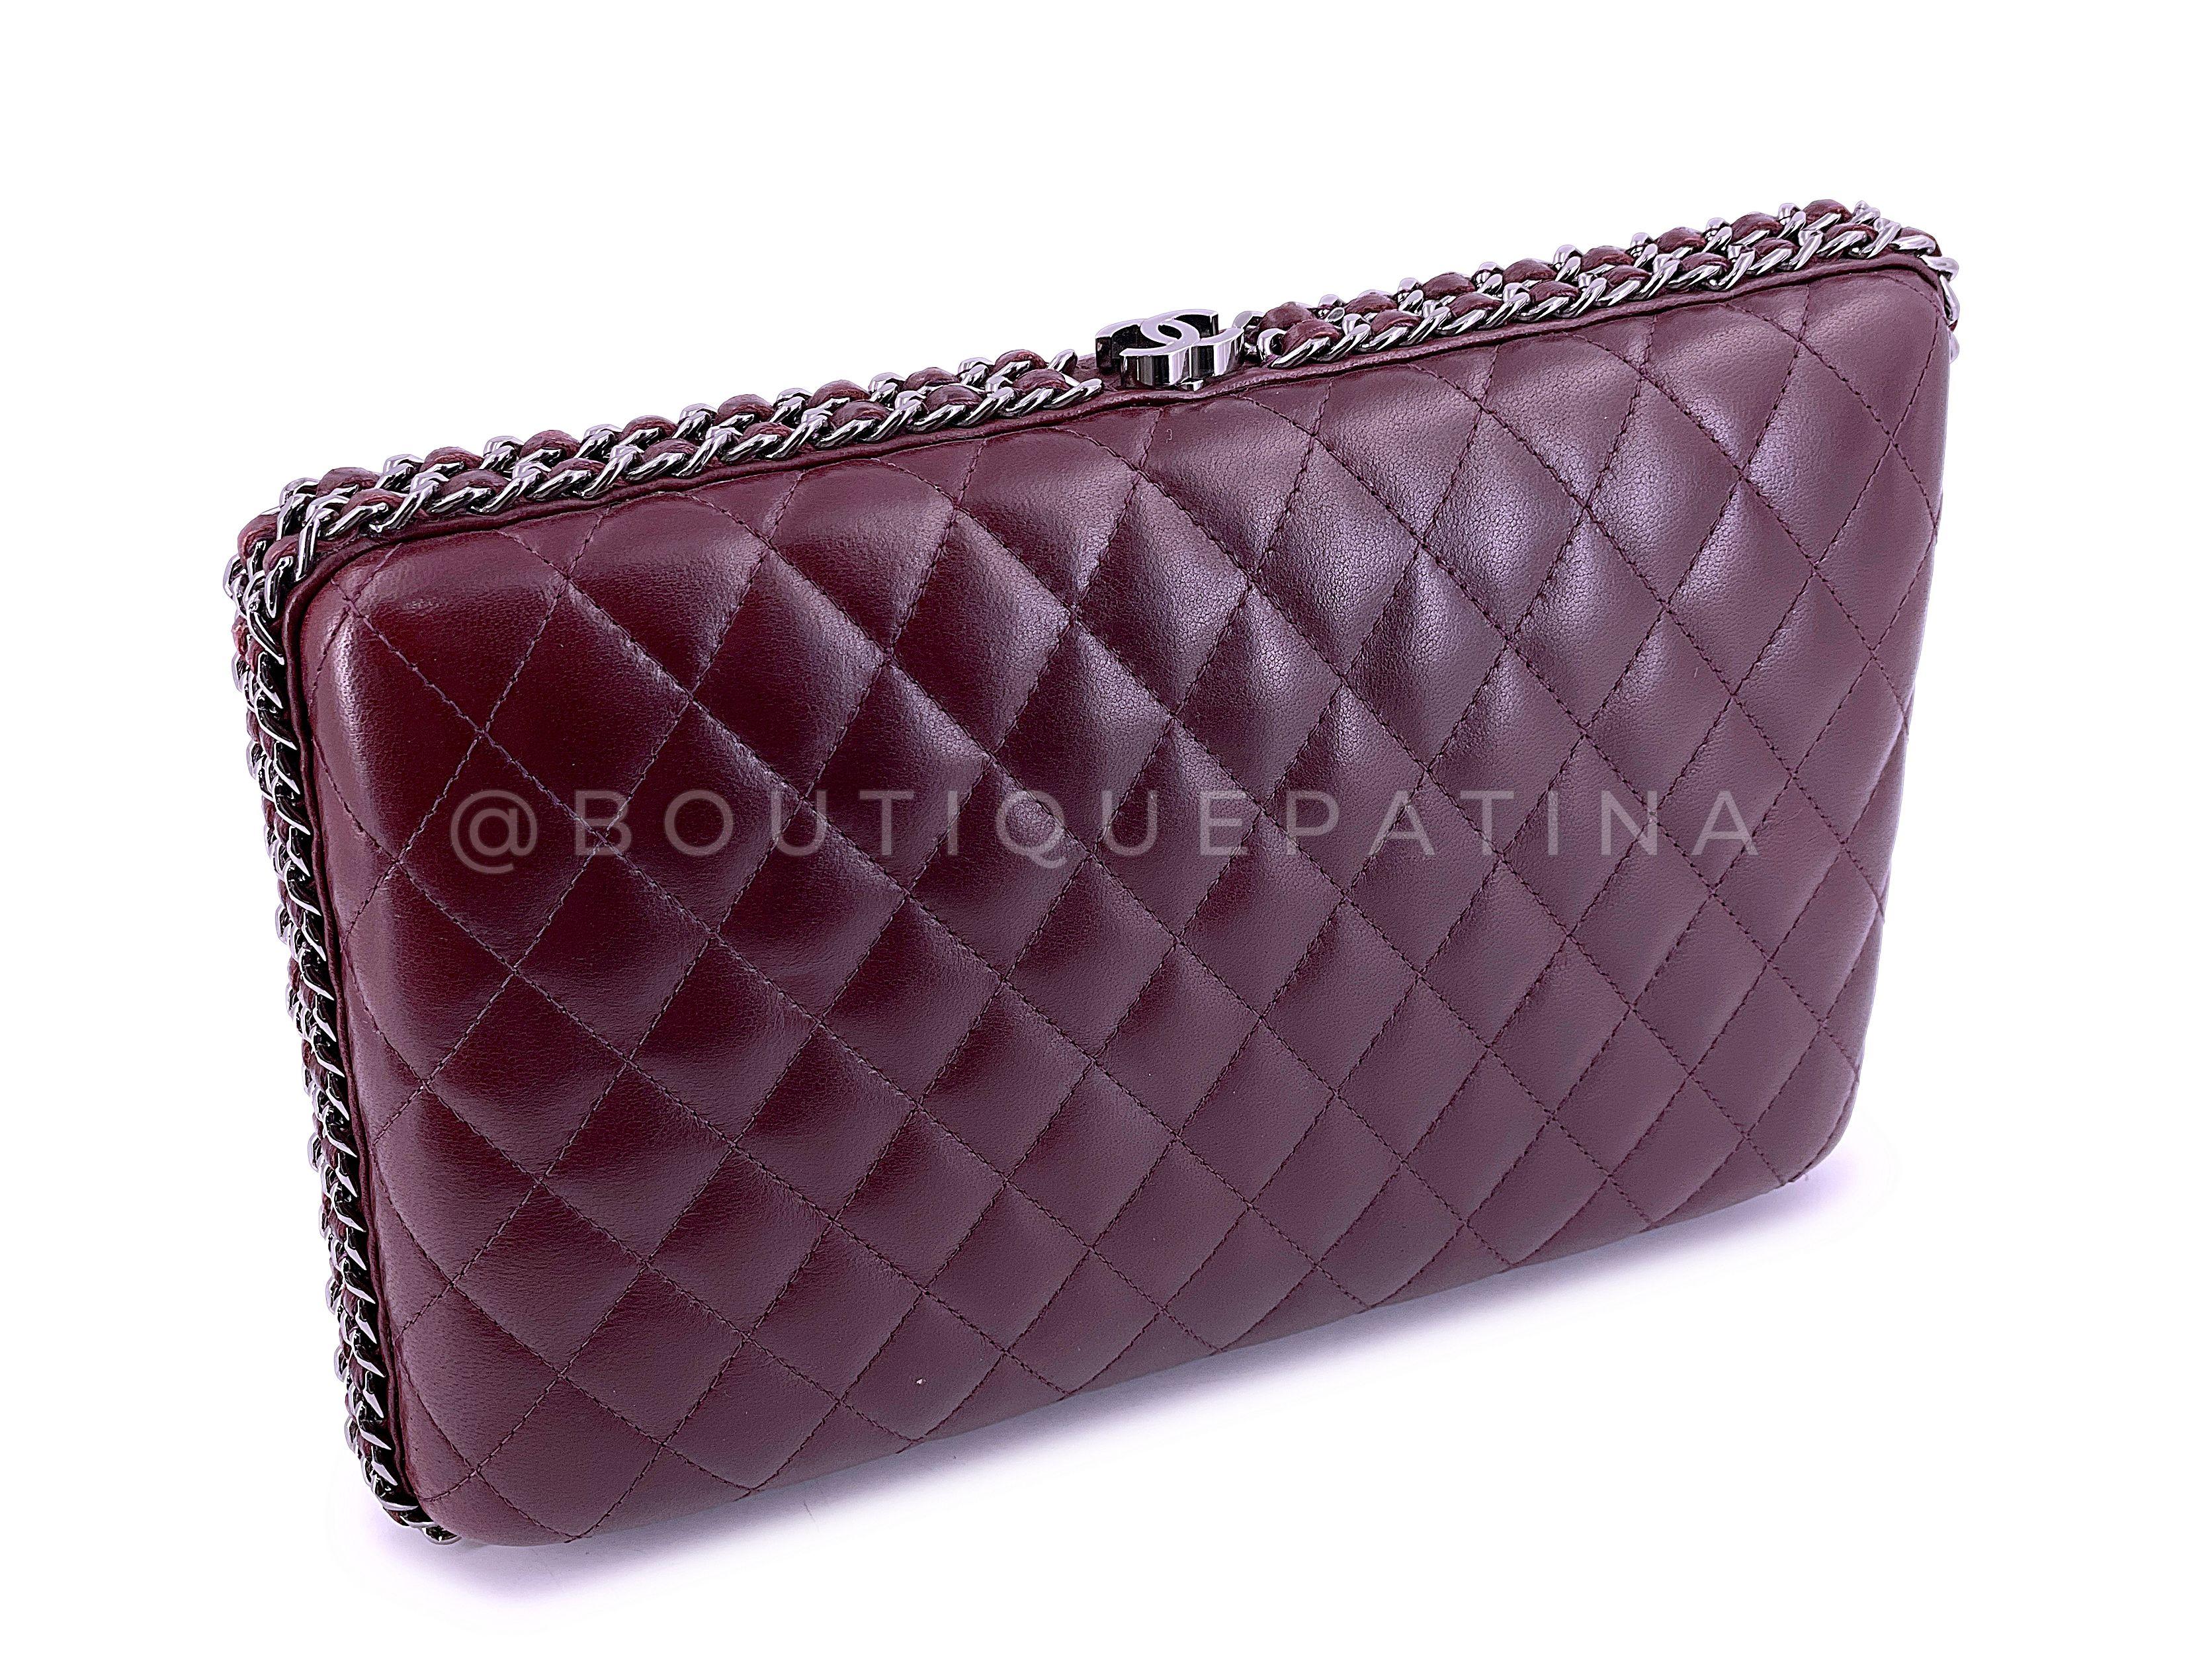 Chanel 2012 Bordeaux Oversized Hard Quilted Chain Around Clutch Bag RHW 67849 In Excellent Condition For Sale In Costa Mesa, CA